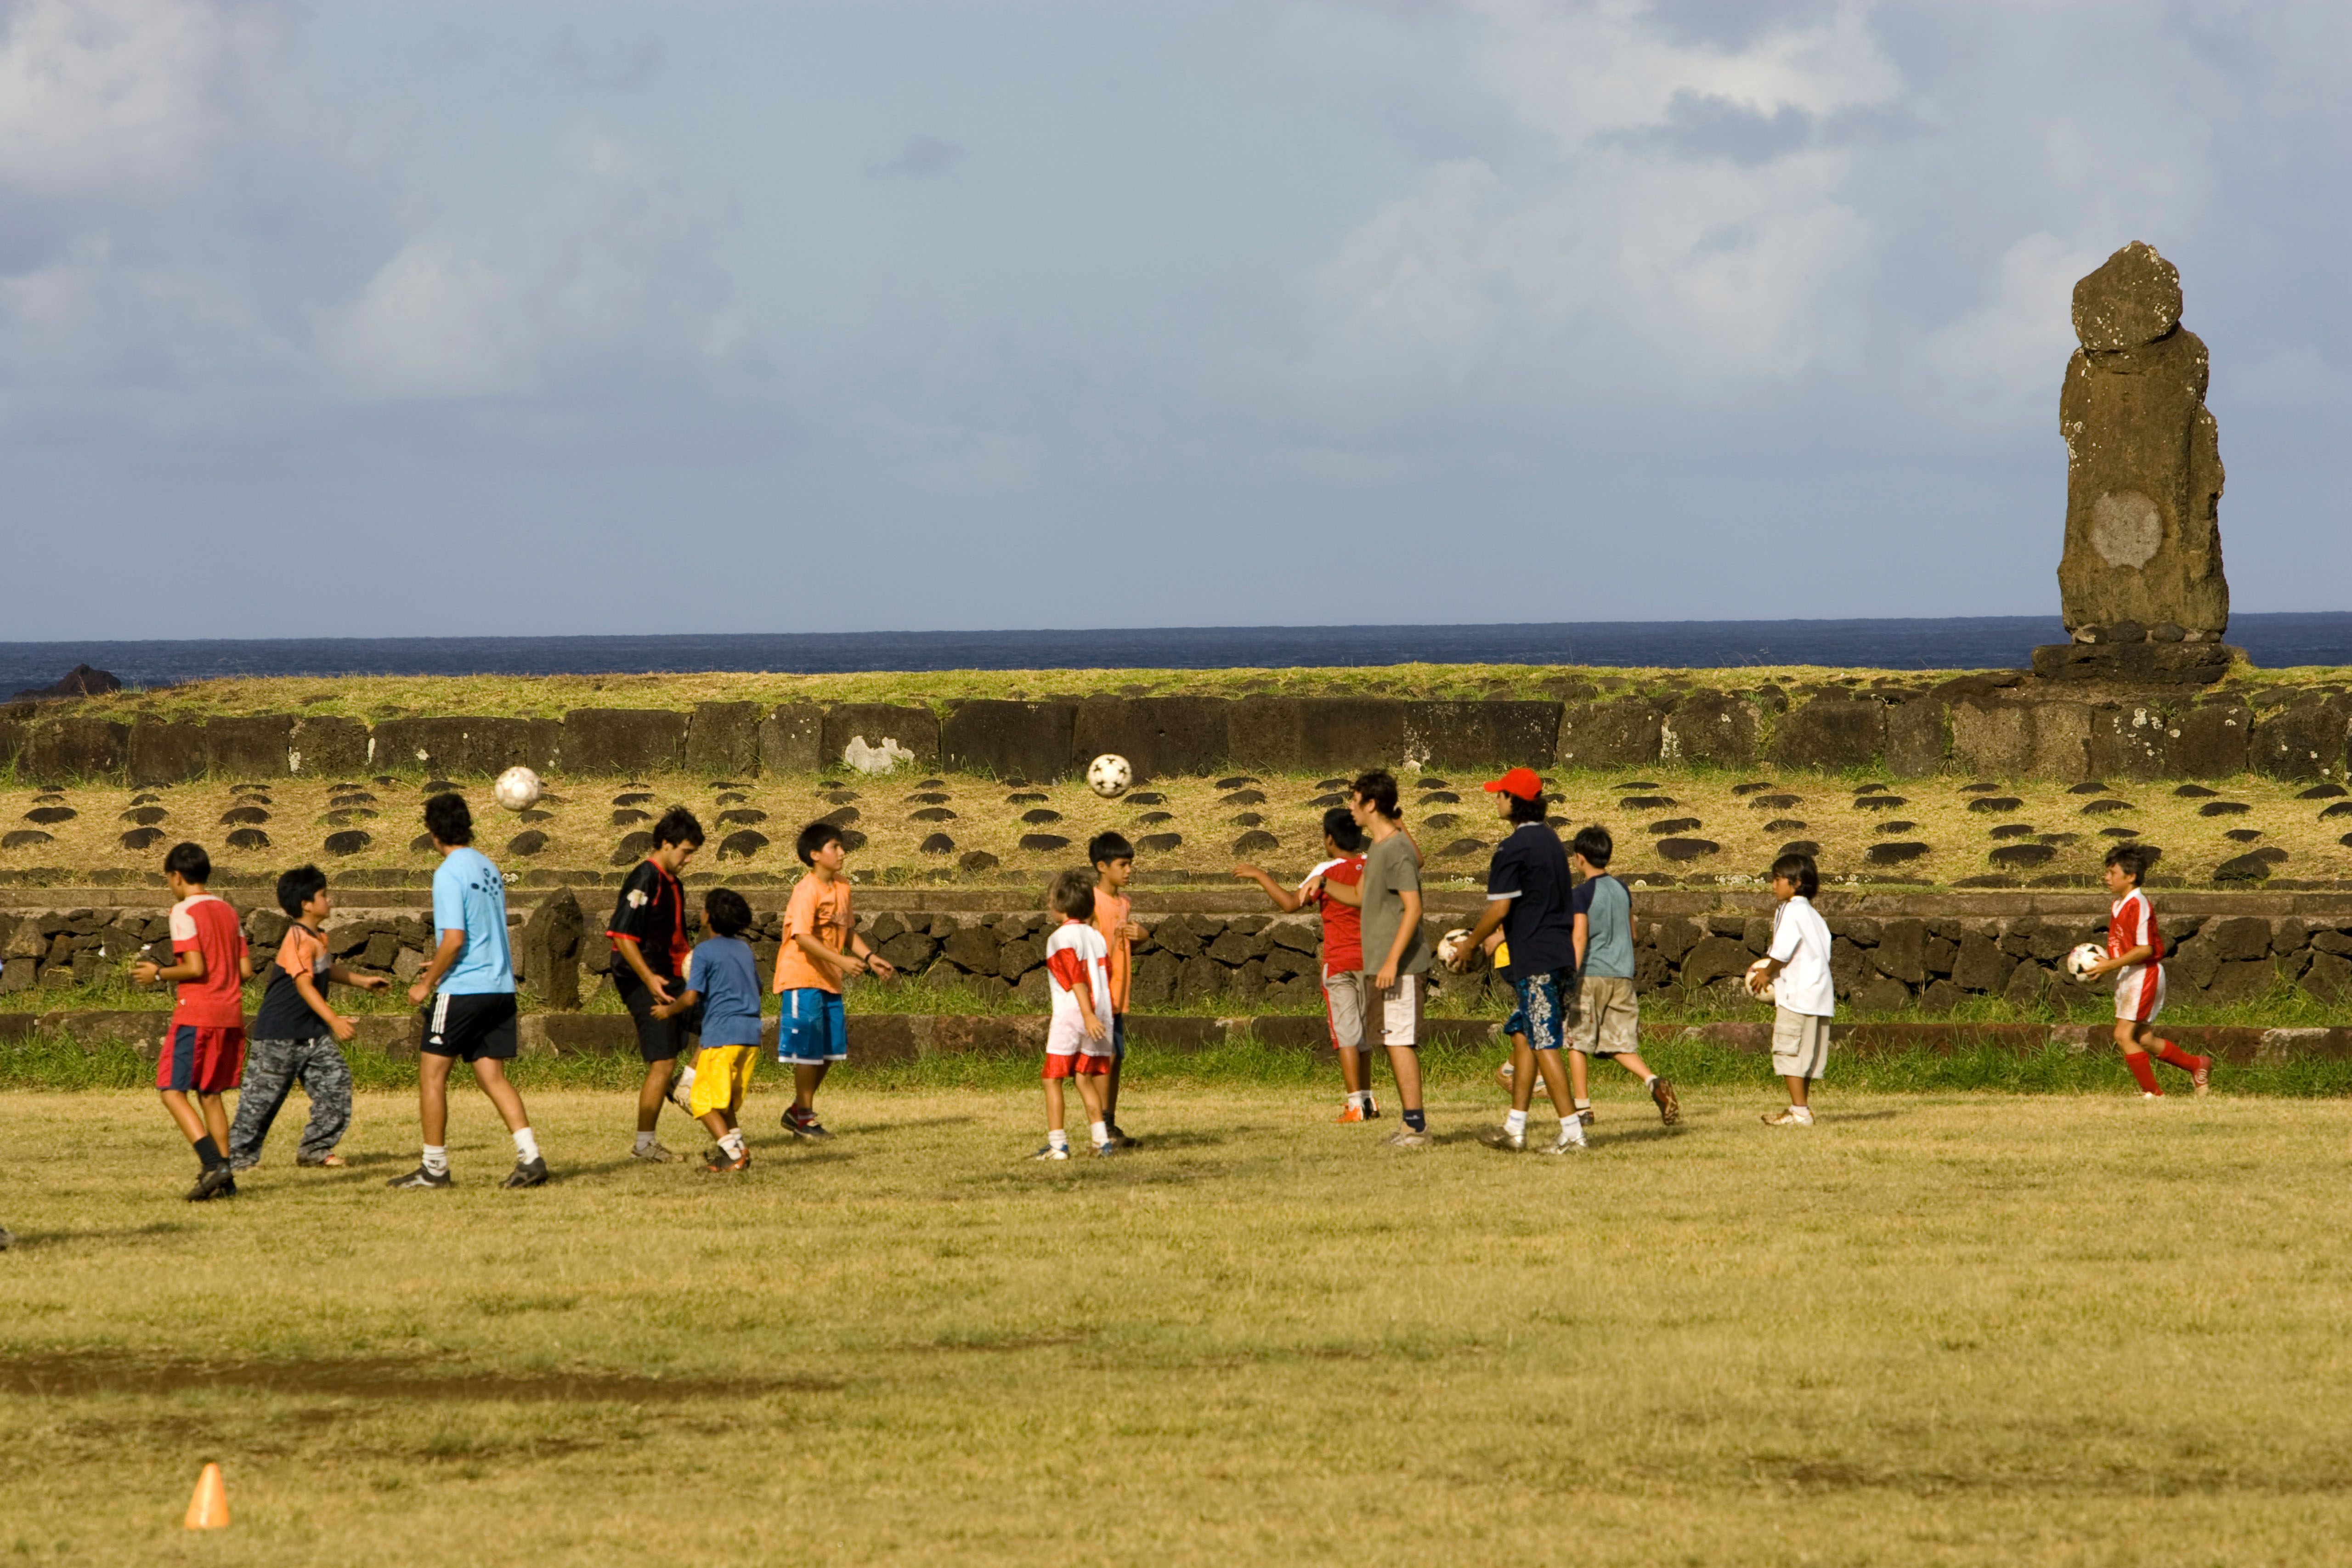 Children playing soccer in Rapa Nui. The percentage of young people who speak Rapa Nui has been steadily declining. 